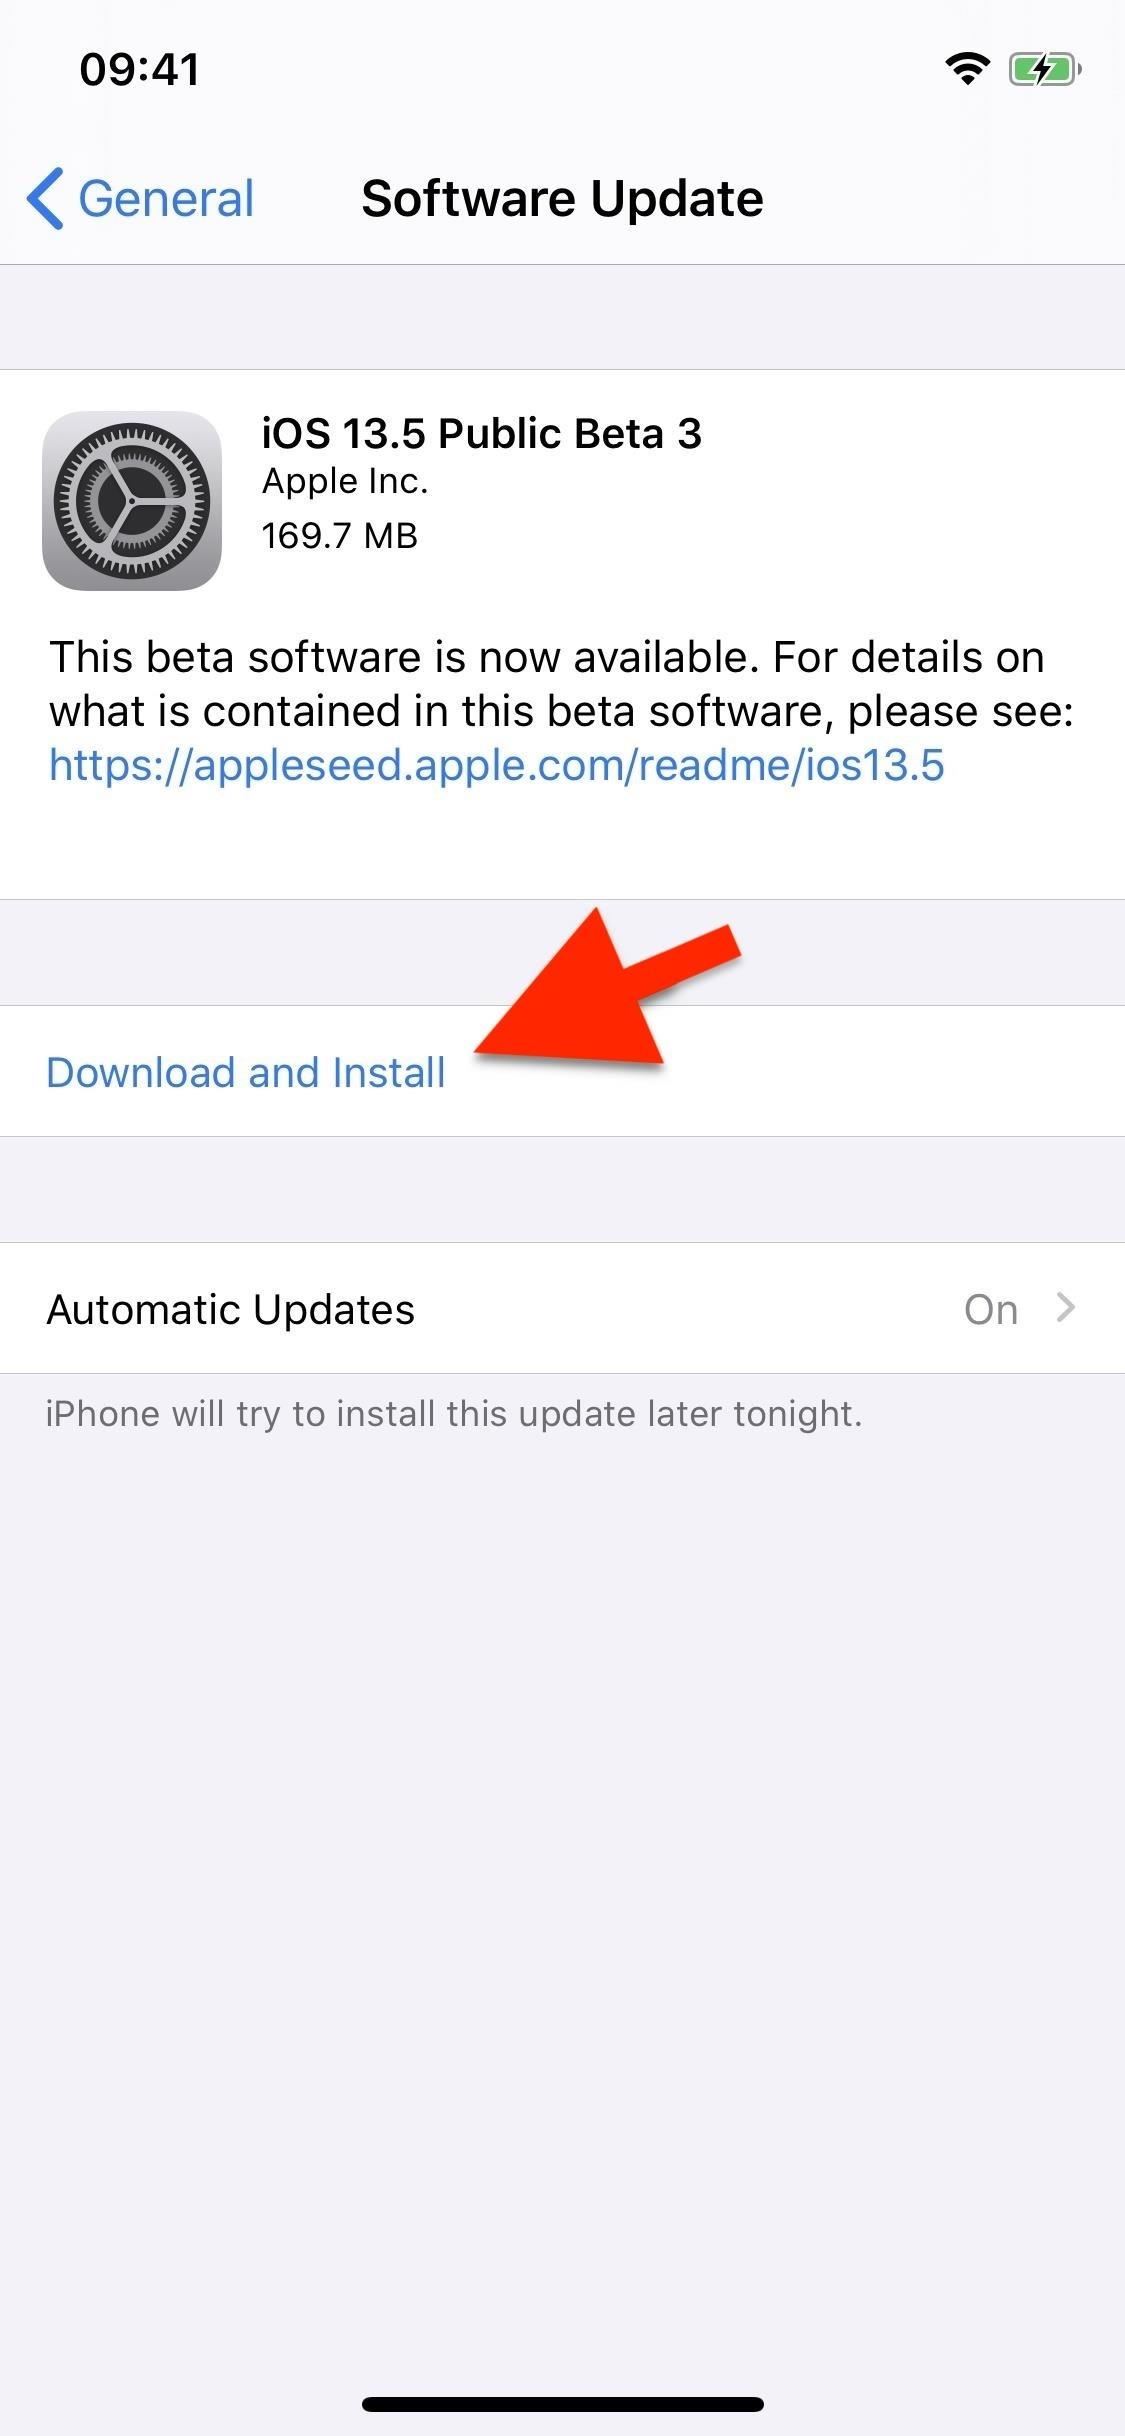 Go to your phone's settings and select "Software update".
Select "Download and install" if an update is available.